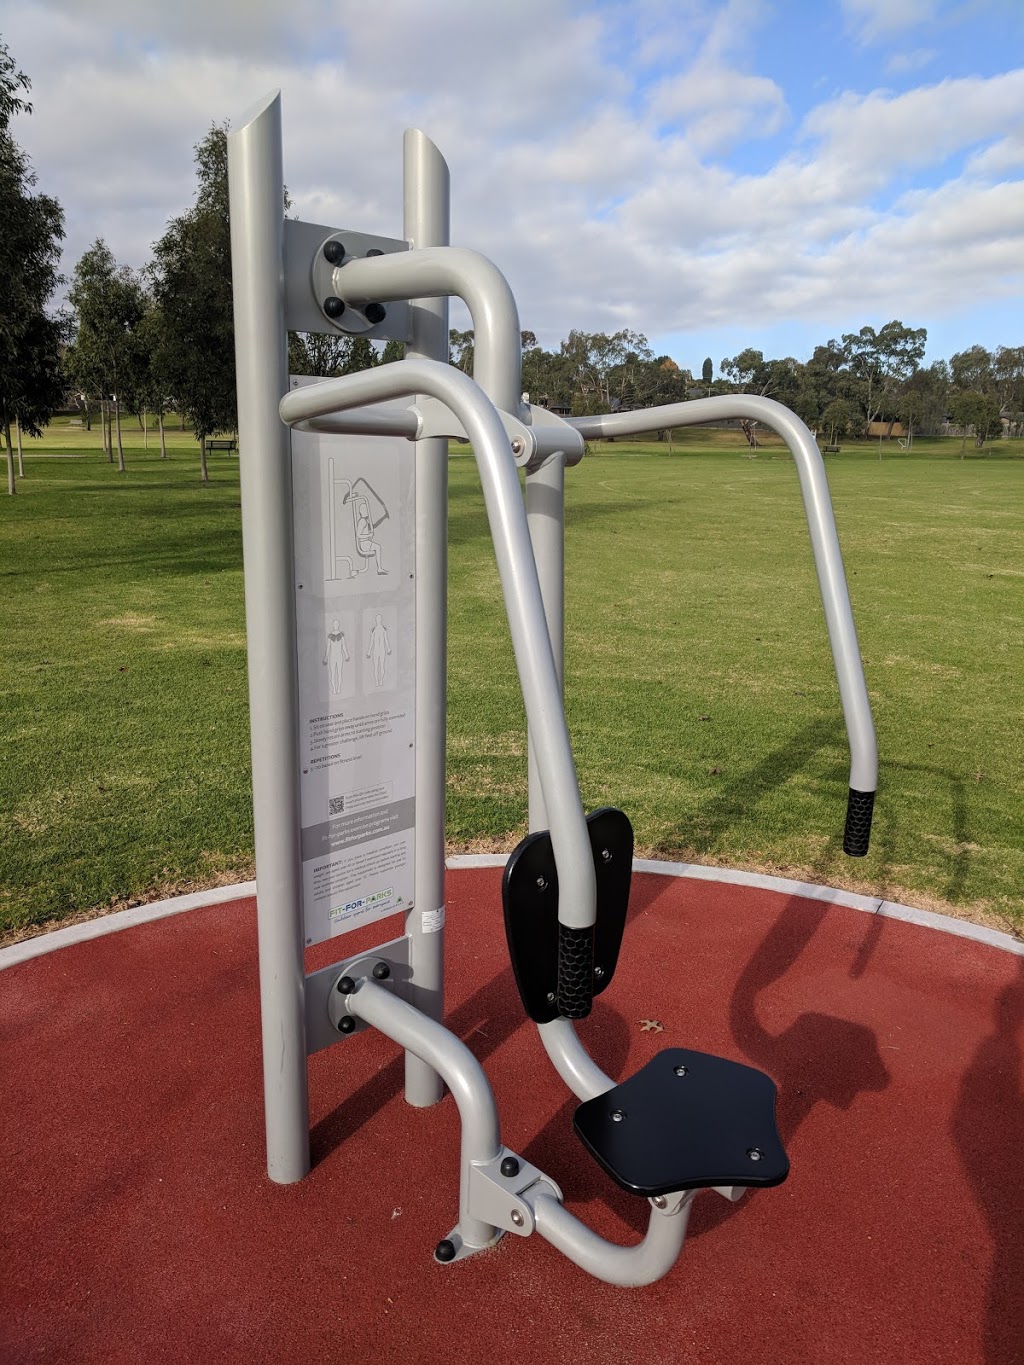 Fit For Fun Park, Outdoor Fitness | Dandenong North VIC 3175, Australia